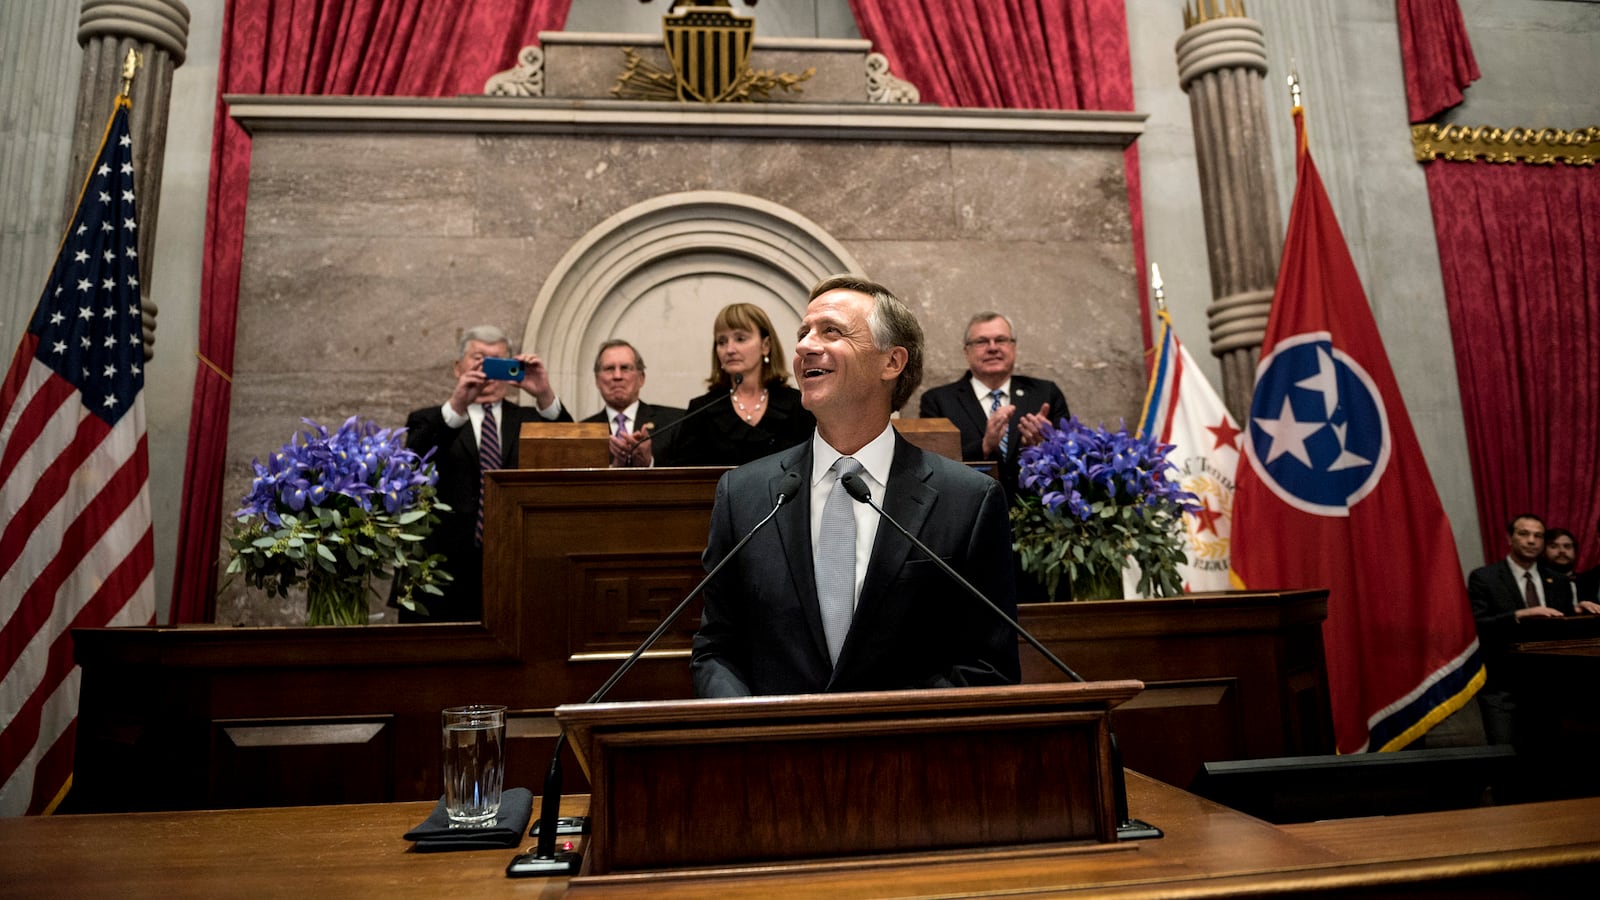 Gov. Bill Haslam prepares to deliver his 2018 State of the State address Monday evening during a joint session of the Tennessee General Assembly in Nashville. It was Haslam's final address to lawmakers and kicked off his last year as governor.